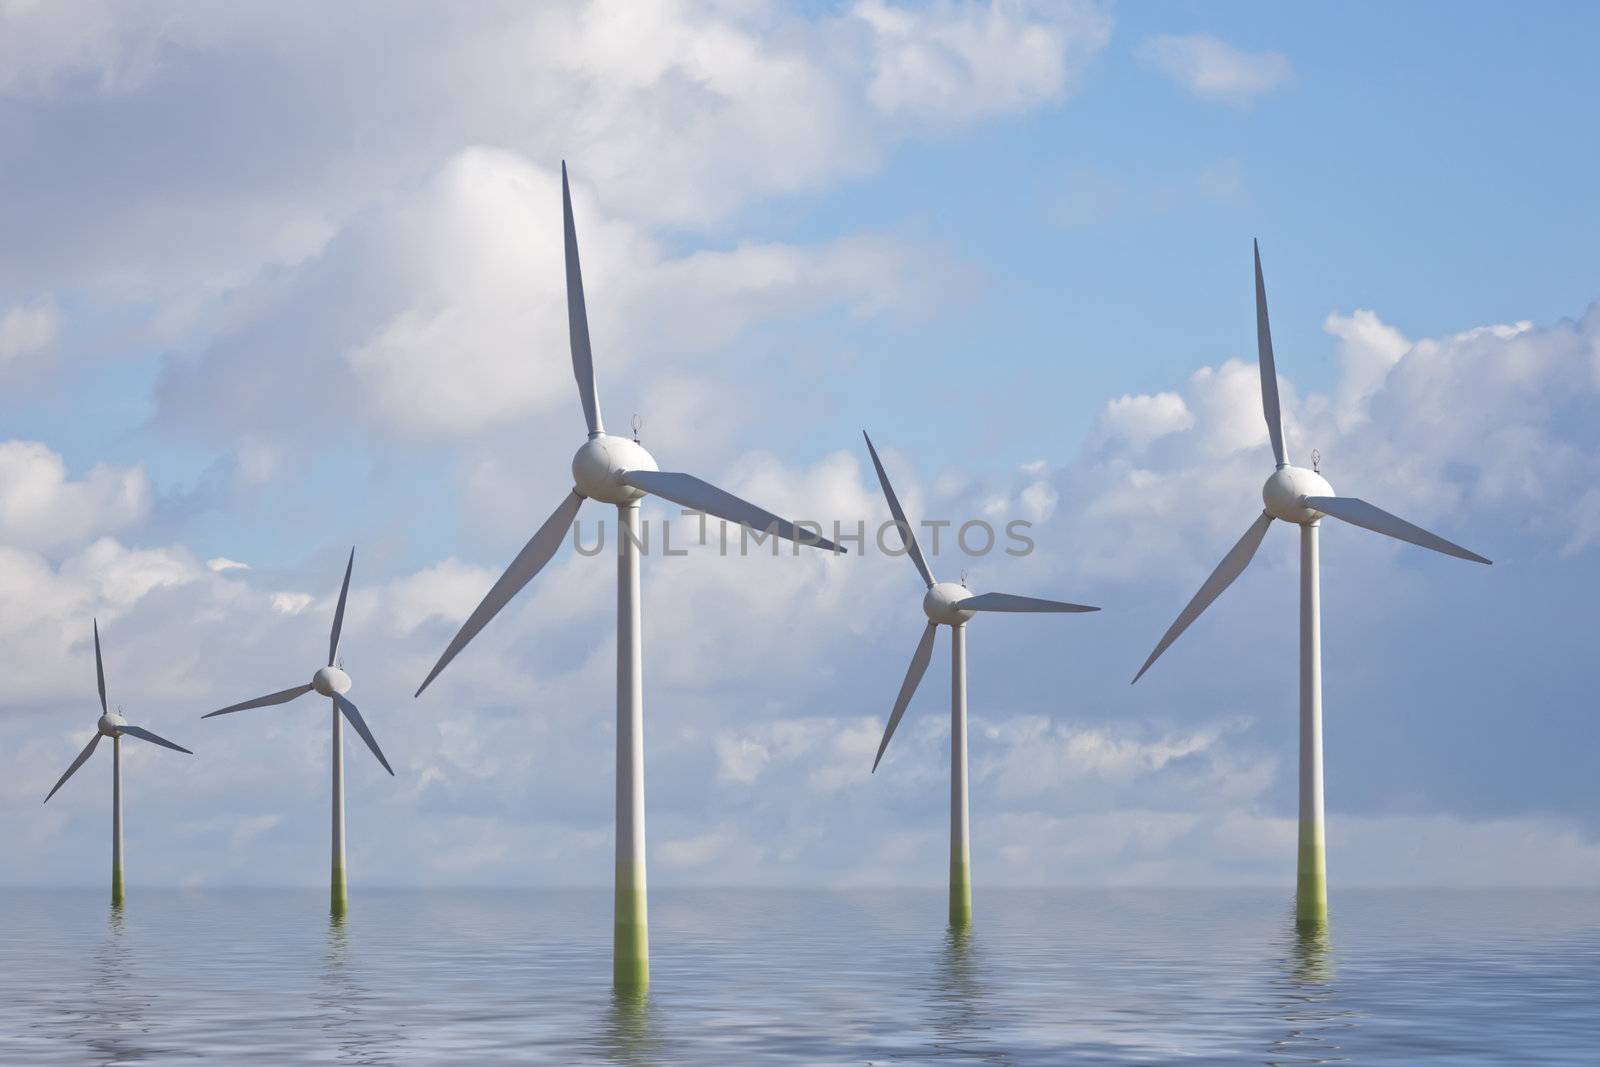 This image shows some wind generator at sea